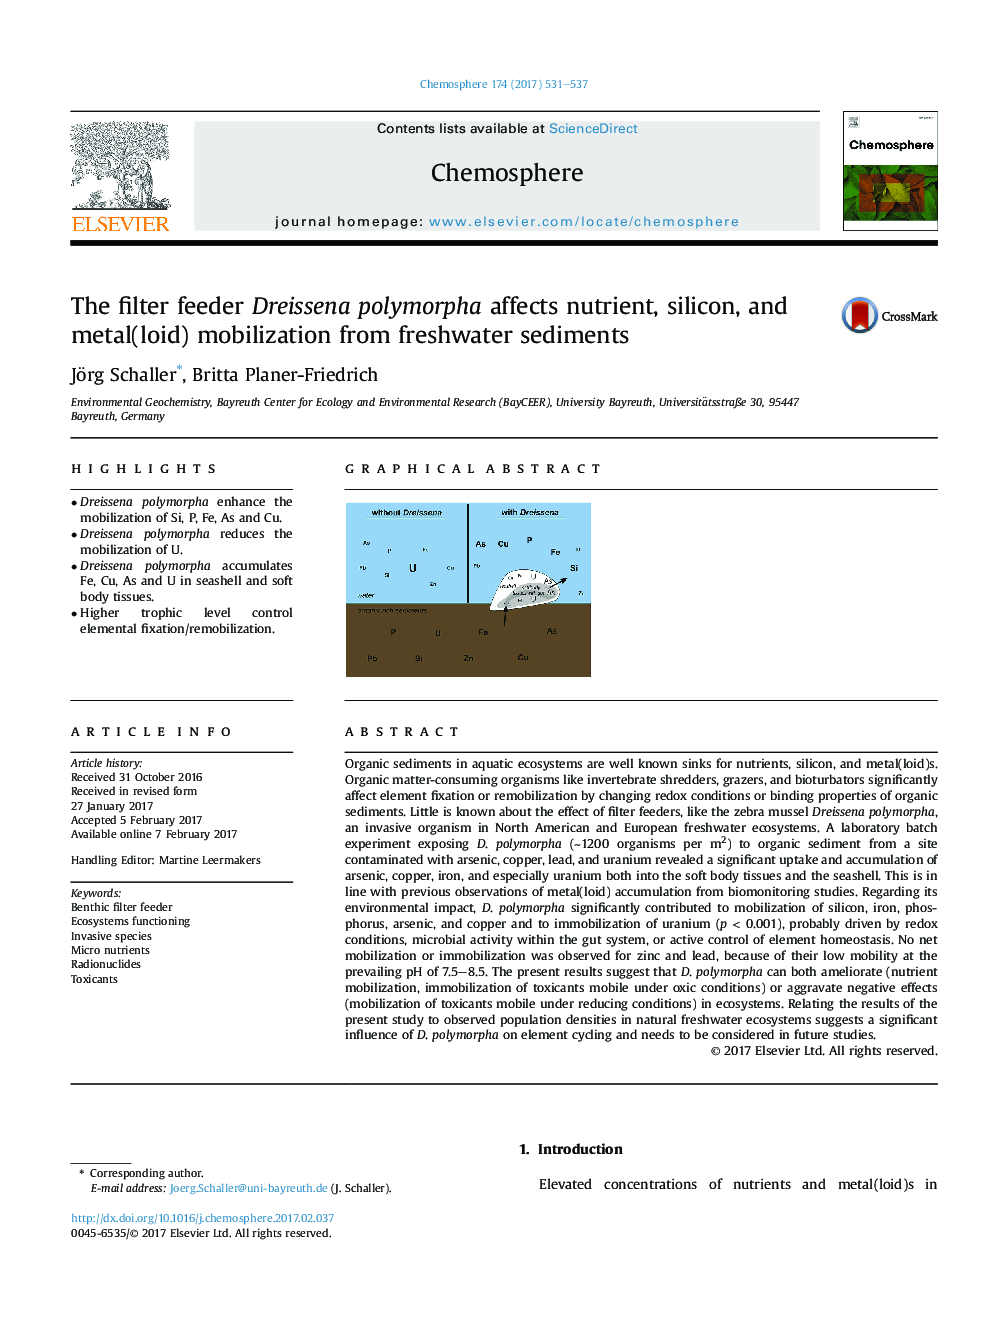 The filter feeder Dreissena polymorpha affects nutrient, silicon, and metal(loid) mobilization from freshwater sediments